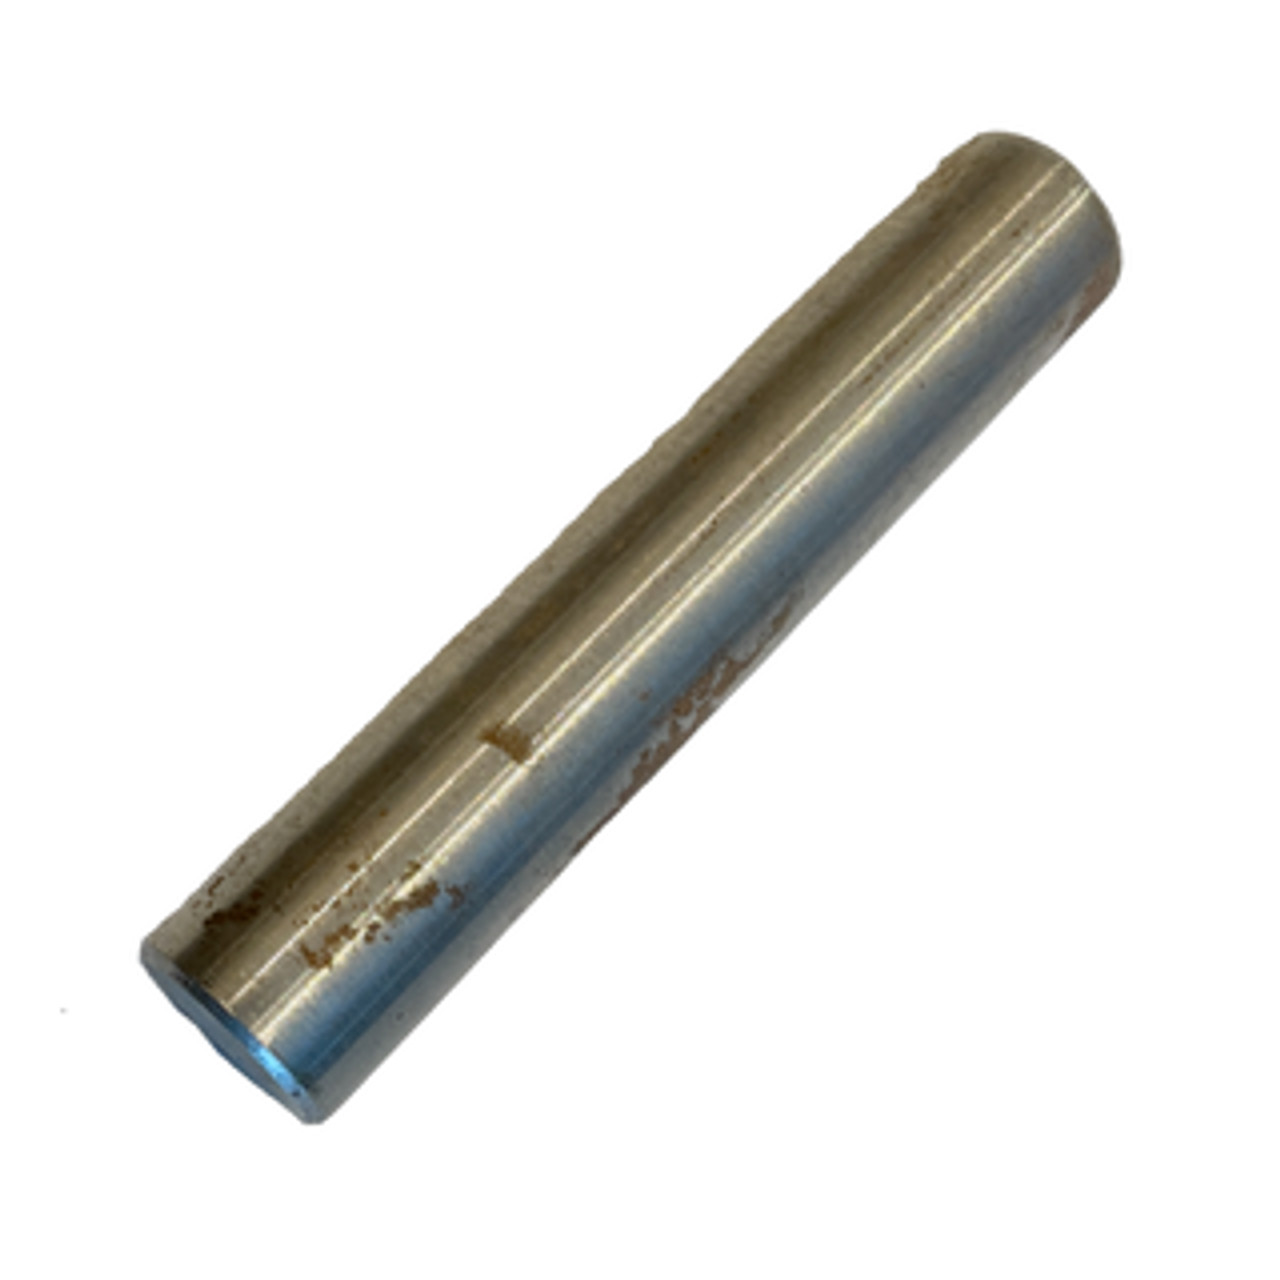 900-4904-00: Jib Pin, #10 Taper Old Style For Re Mo